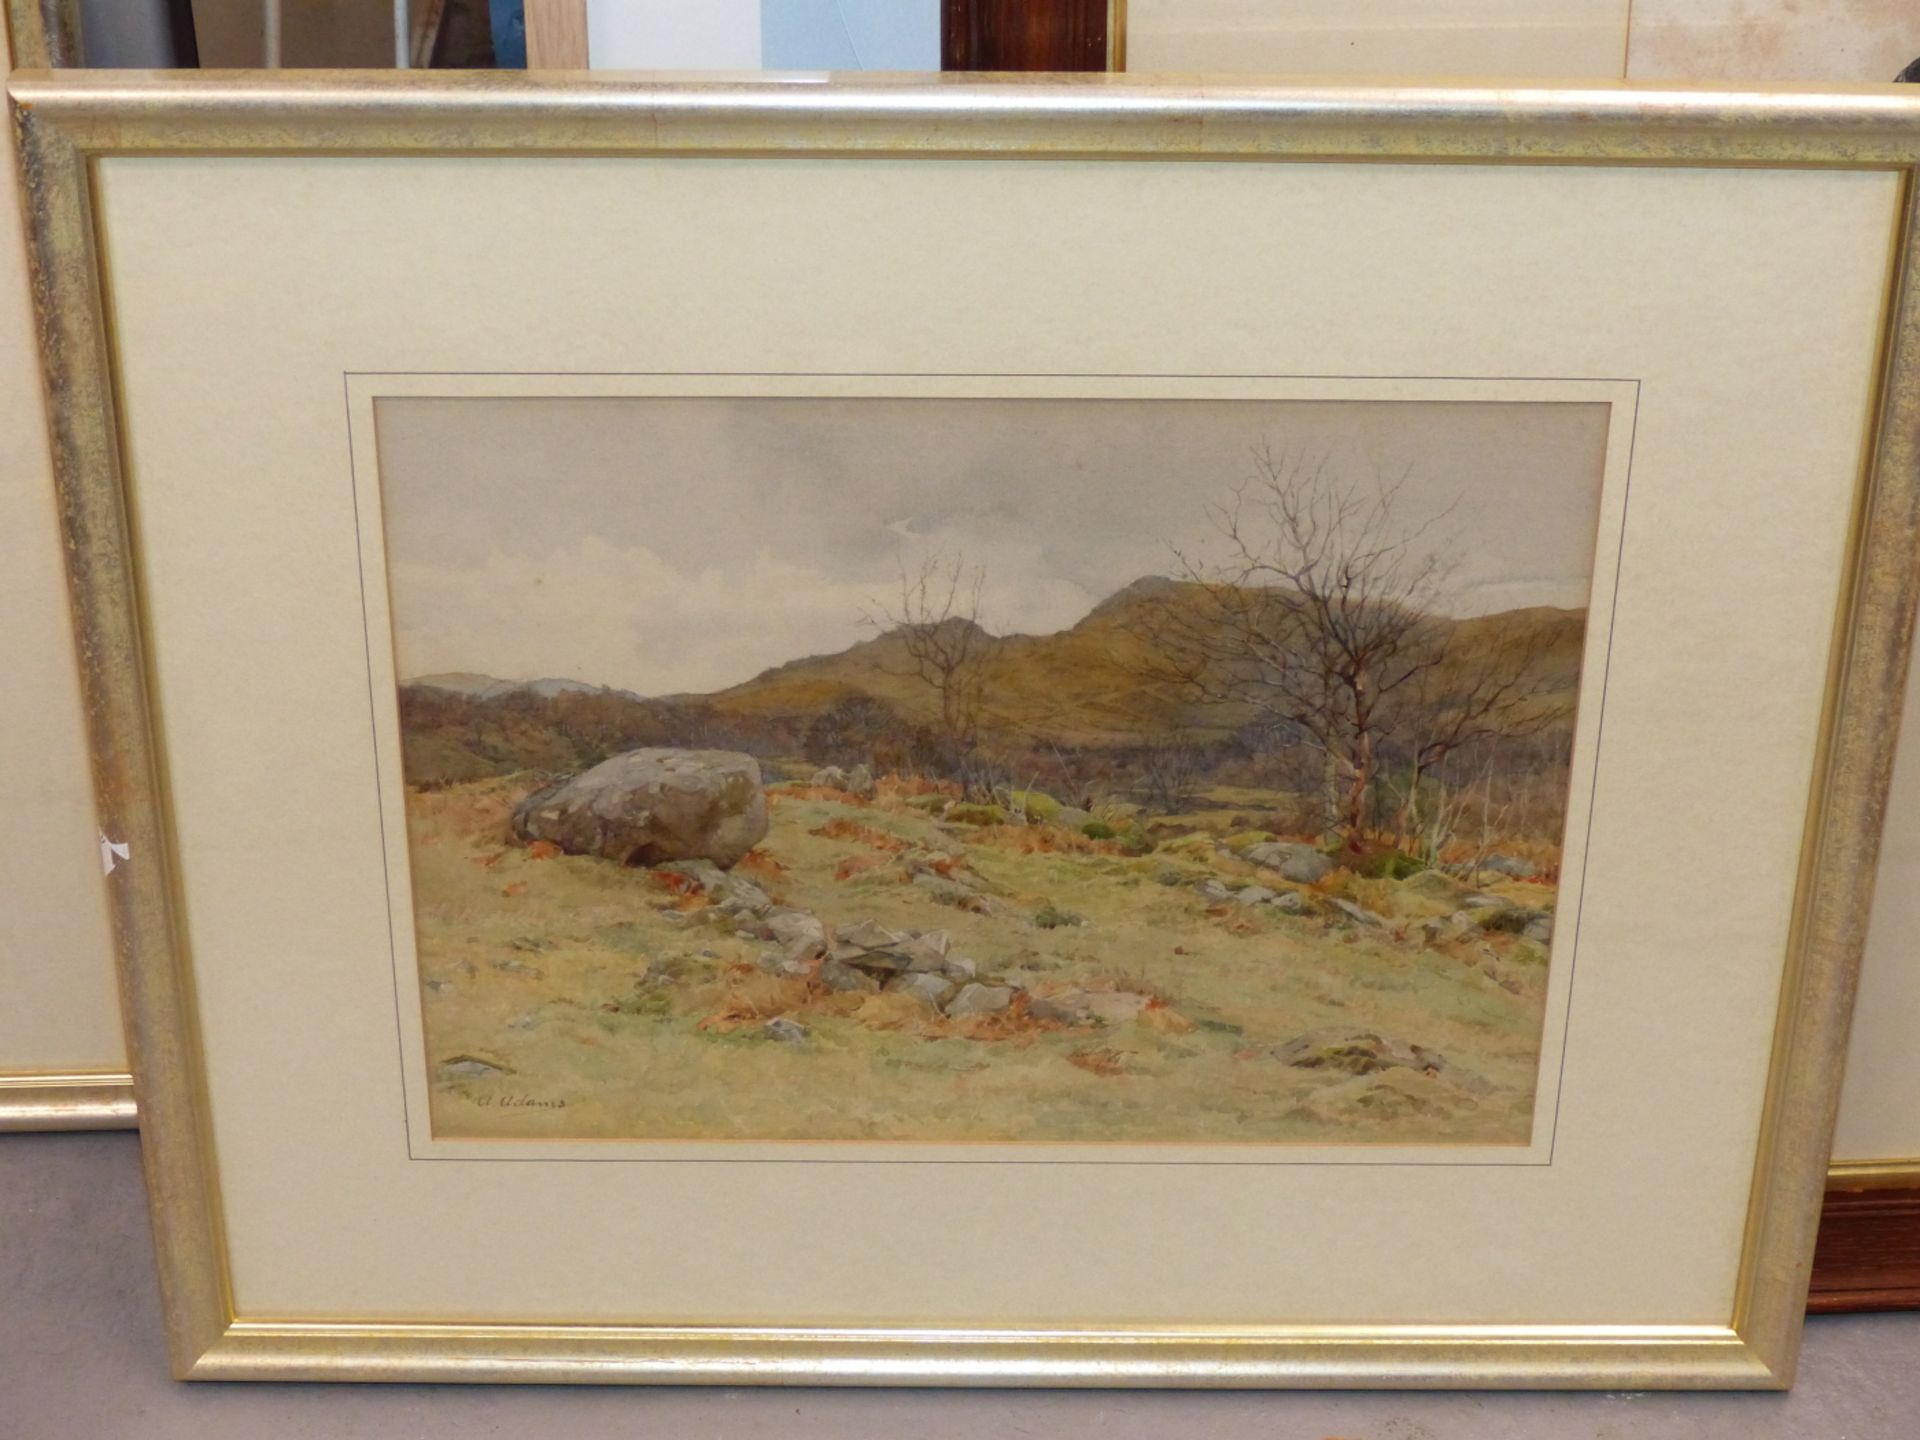 A. ADAMS (EARLY 20TH CENTURY) ROCKY MOUNTAINOUS LANDSCAPE WATERCOLOUR SIGNED L/L. TOGETHER WITH A - Image 9 of 10